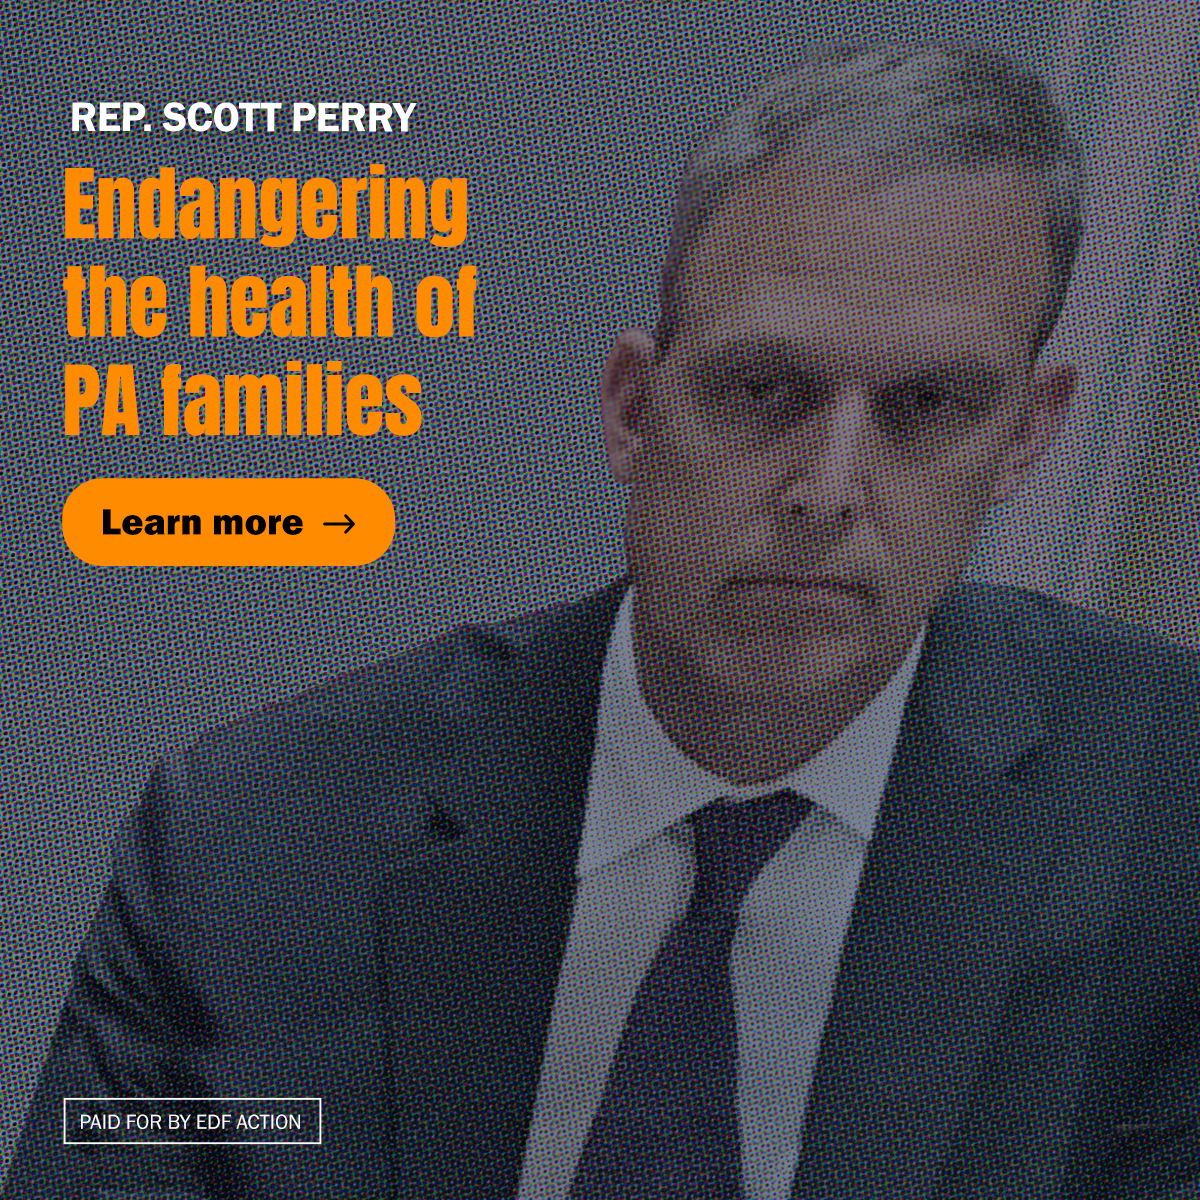 Rep. Scott Perry endangering the health of PA families